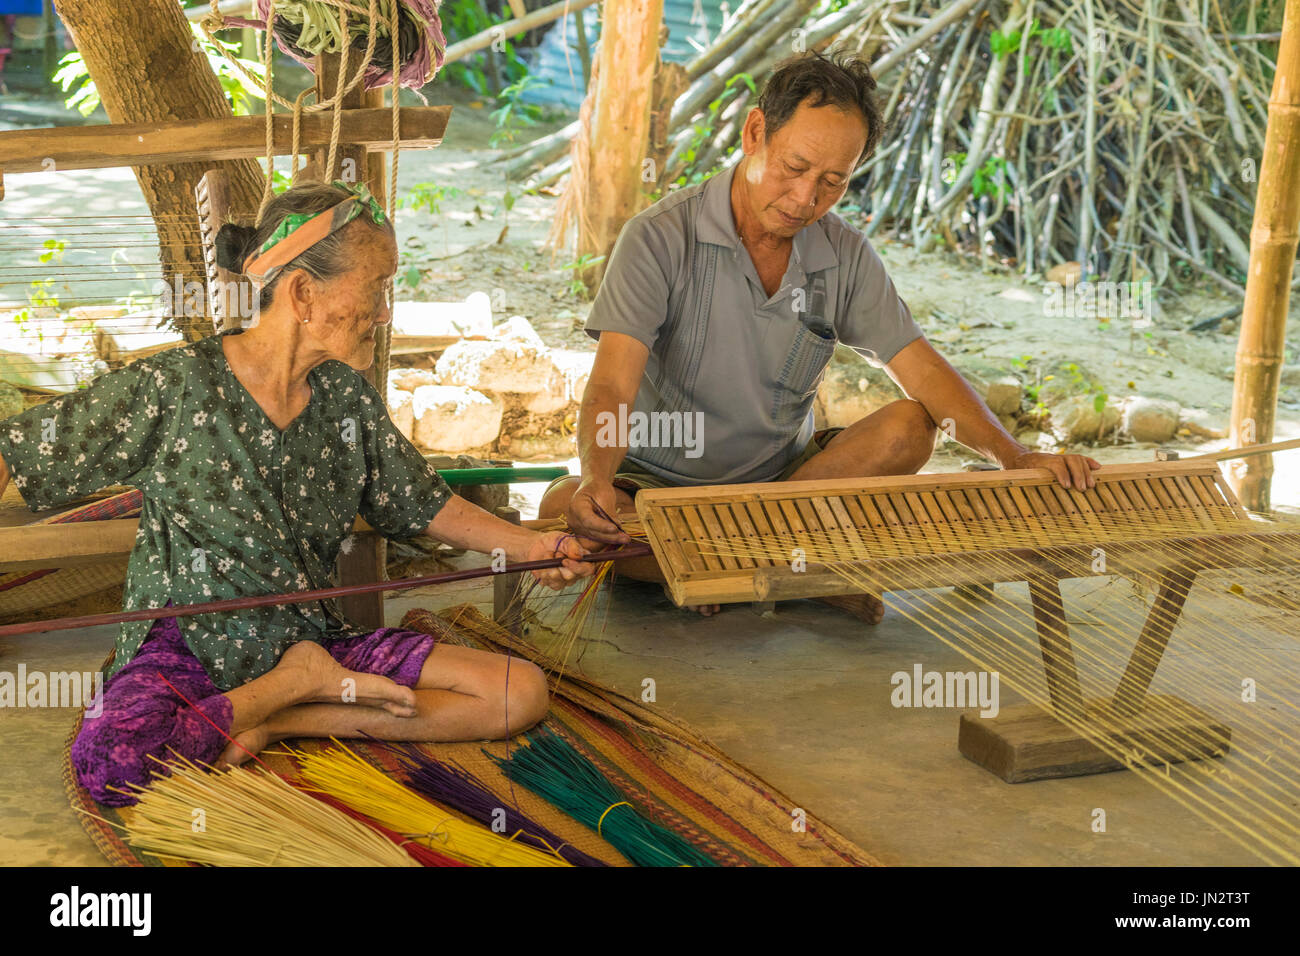 Vietnamese man and woman working together to make reed mat with a simple loom using traditional methods Stock Photo